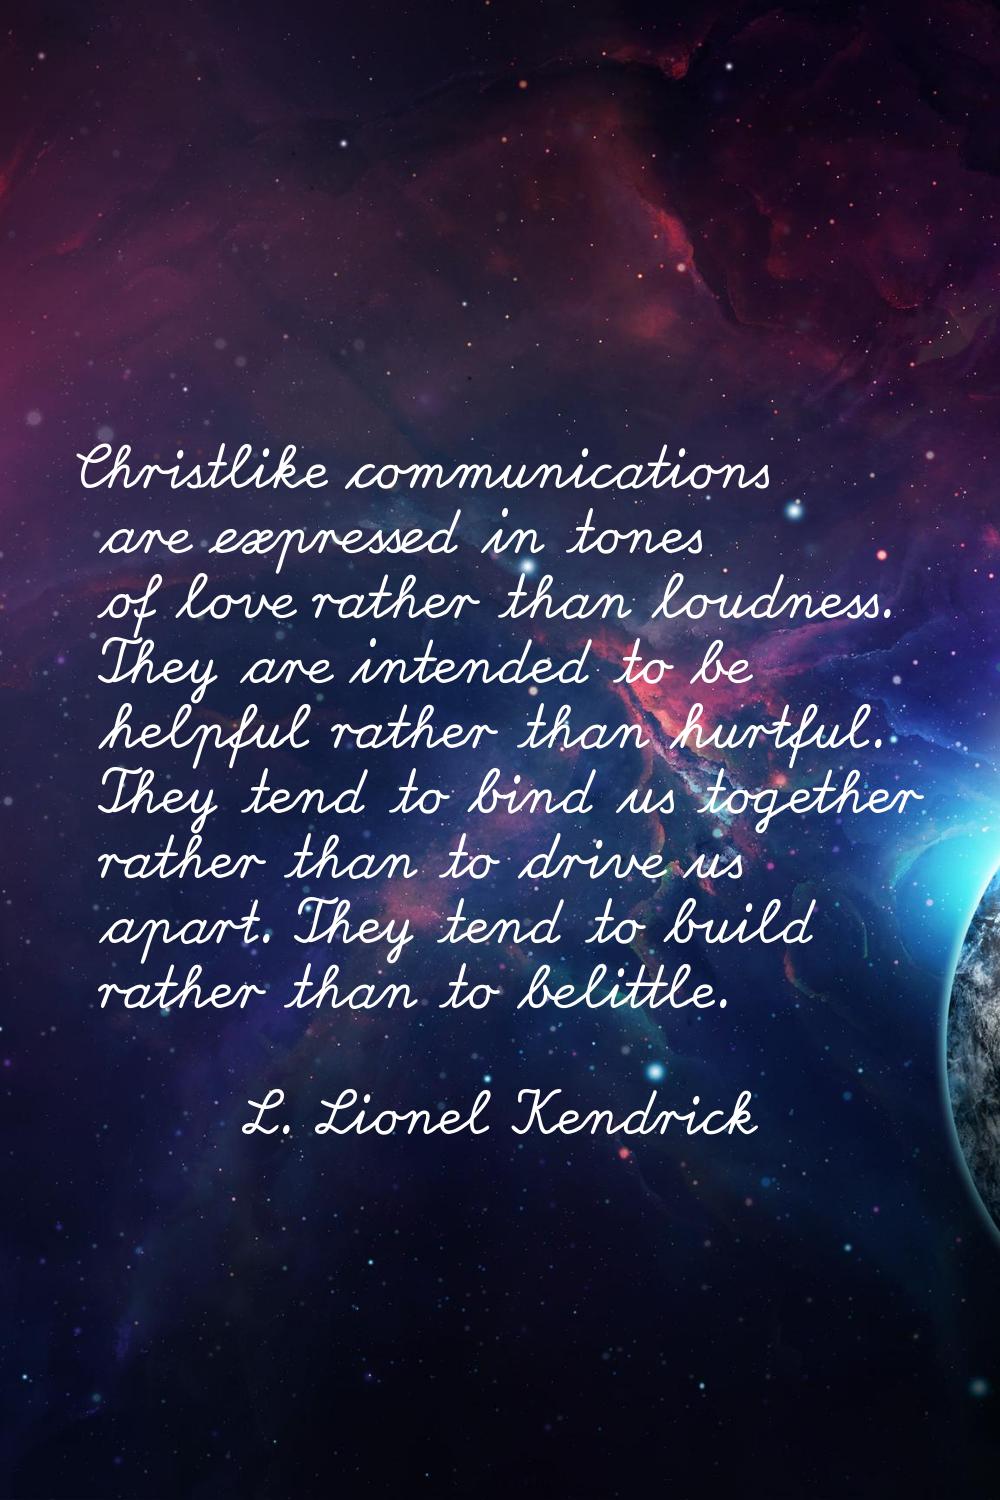 Christlike communications are expressed in tones of love rather than loudness. They are intended to